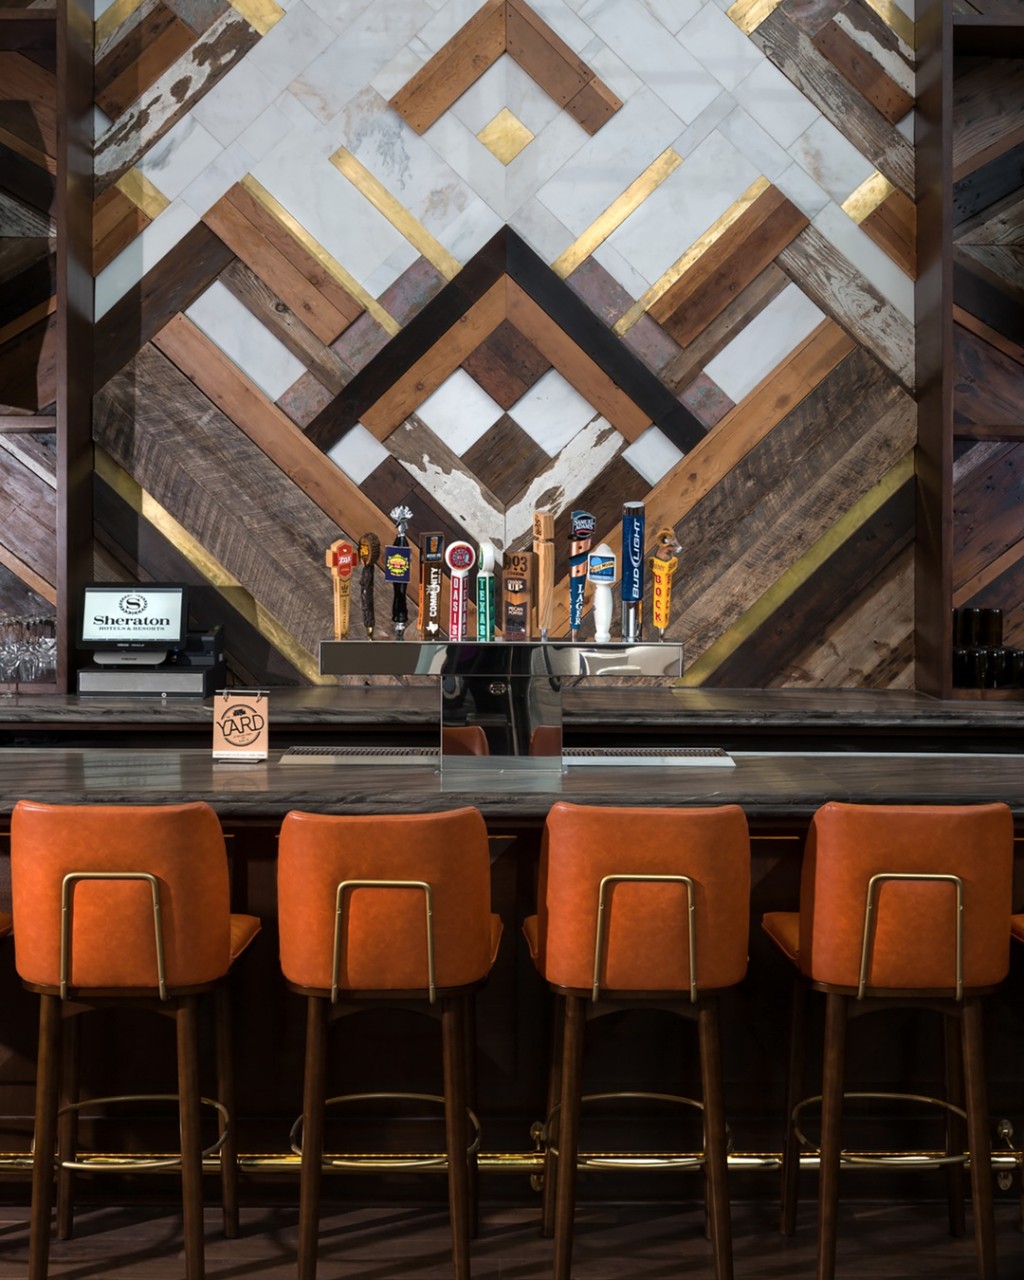 5 Color Trends For Stylish Restaurant Bar Stools